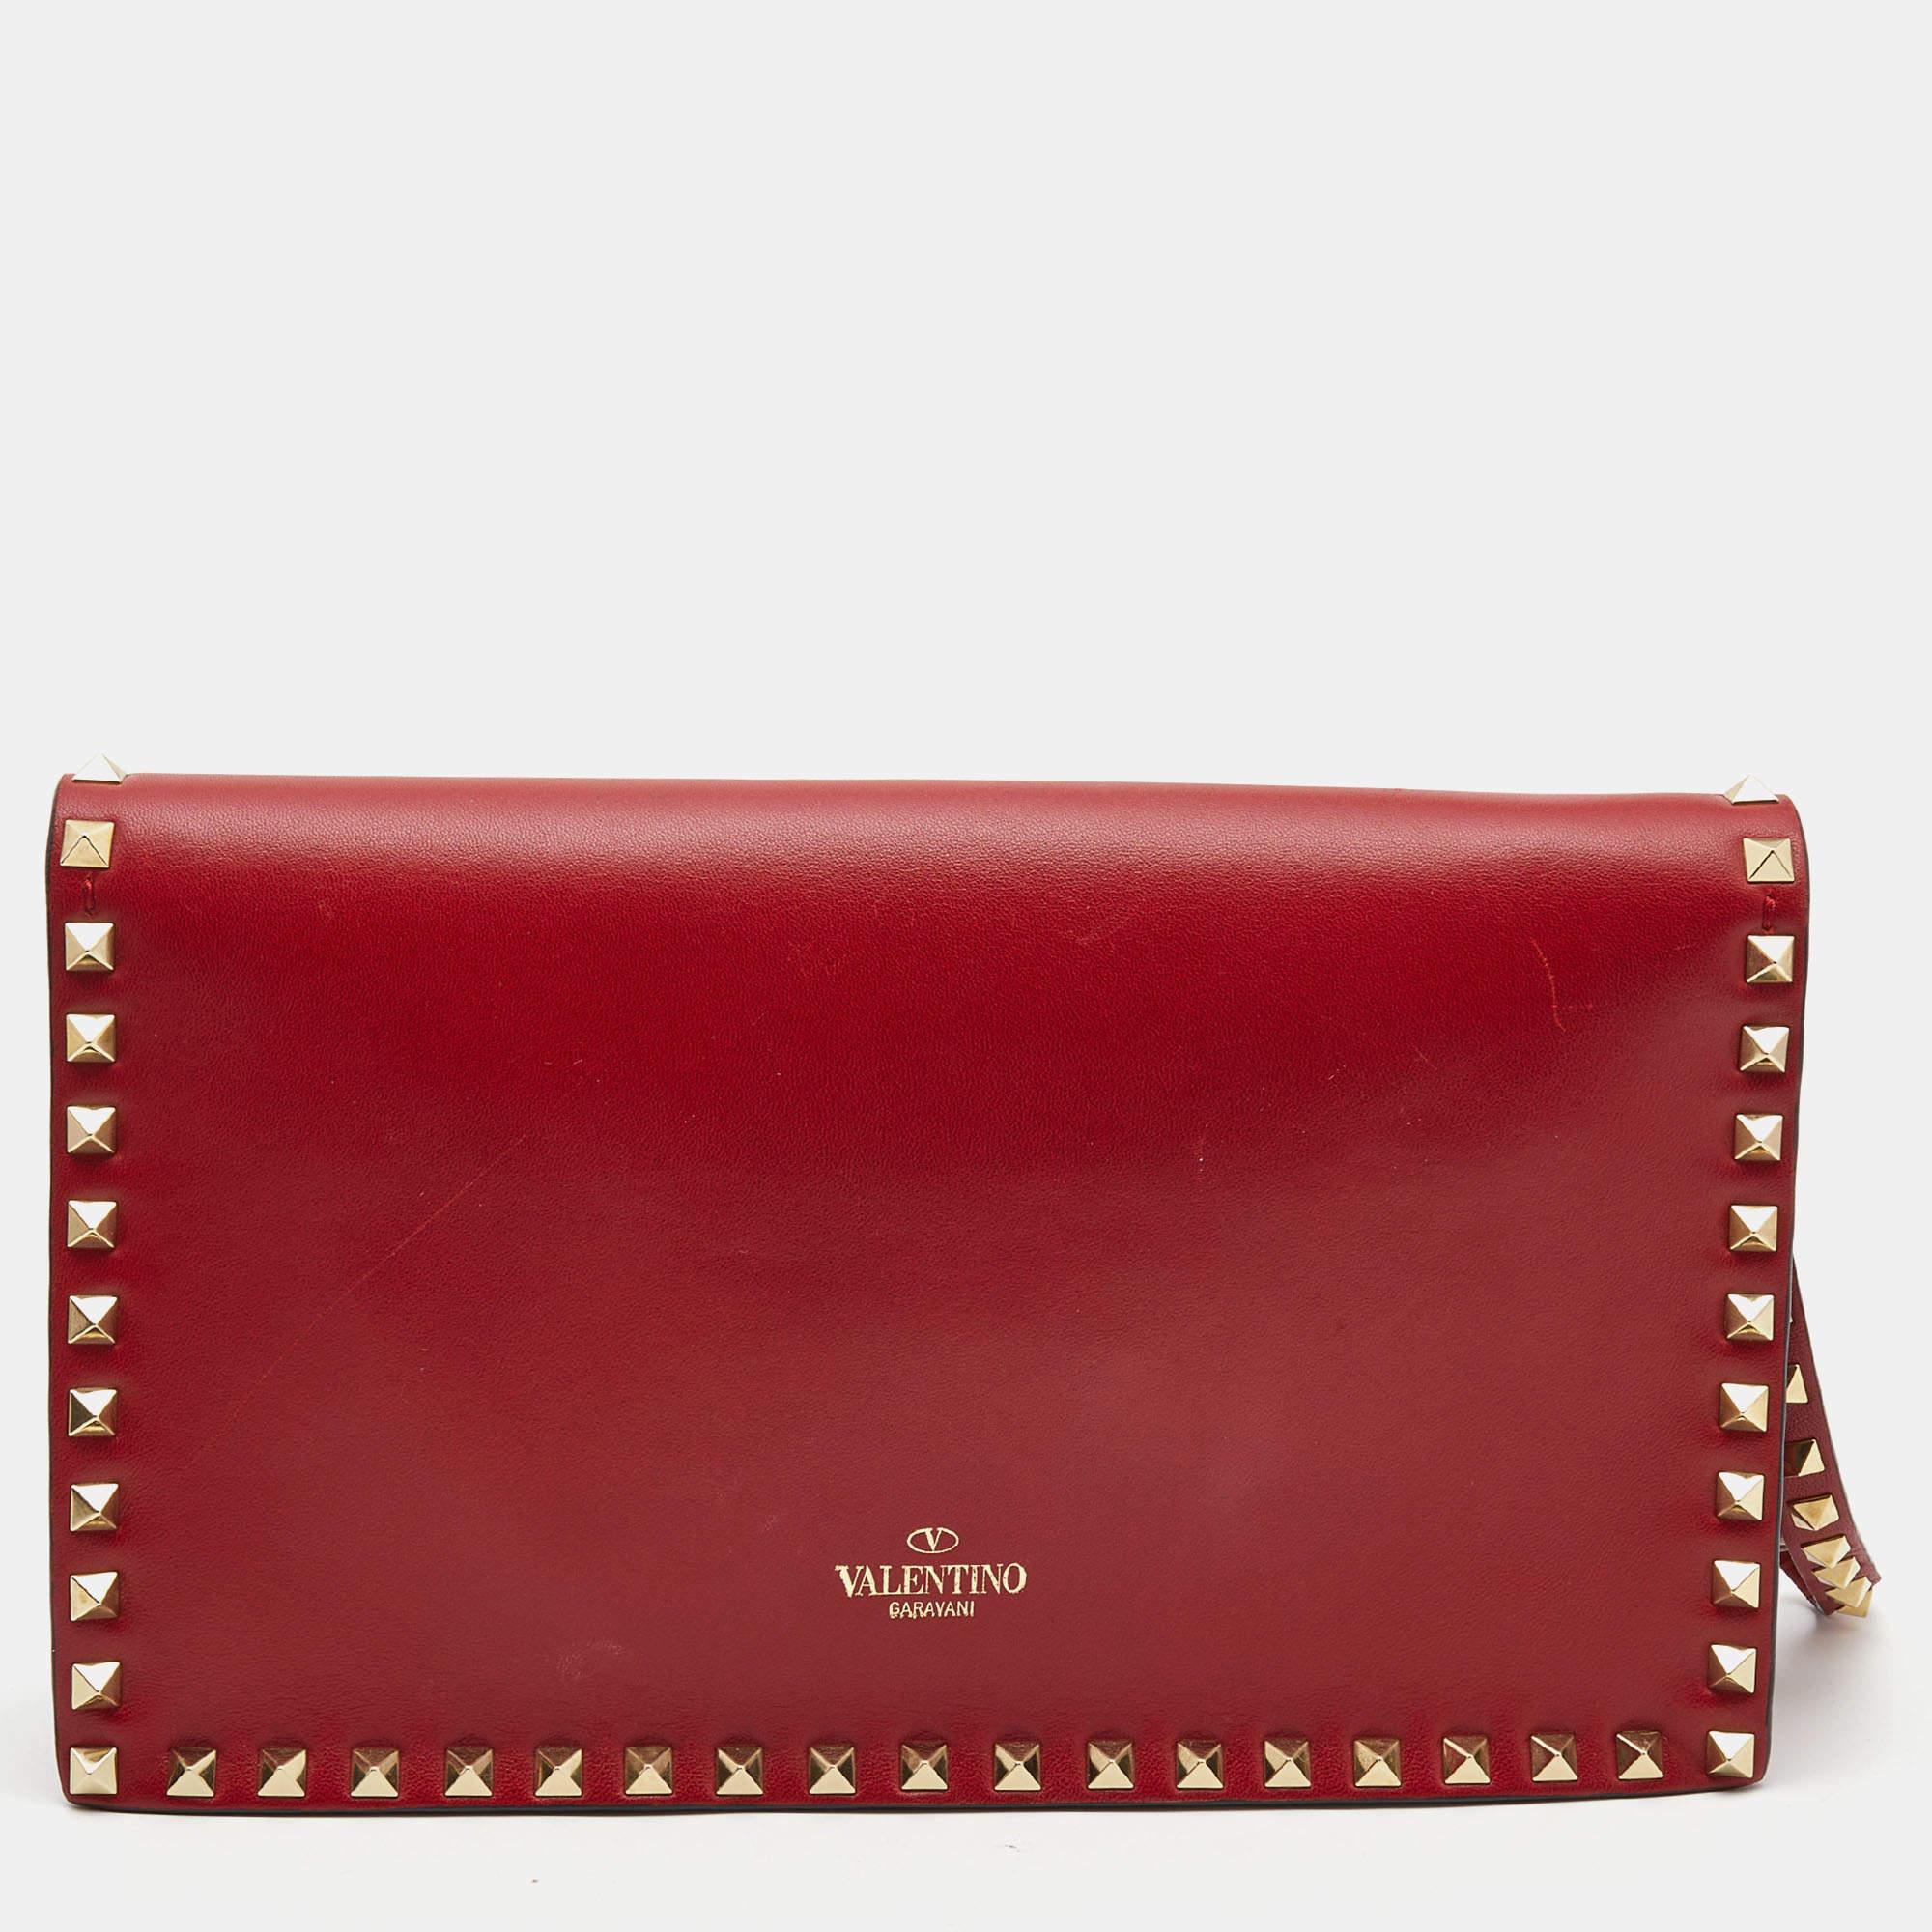 Have all eyes on you when you flaunt this Rockstud clutch by Valentino. Crafted from red leather, it comes with the iconic Rockstud detailing on the exterior. The leather lined interior is divided into compartments to keep your monetary essentials